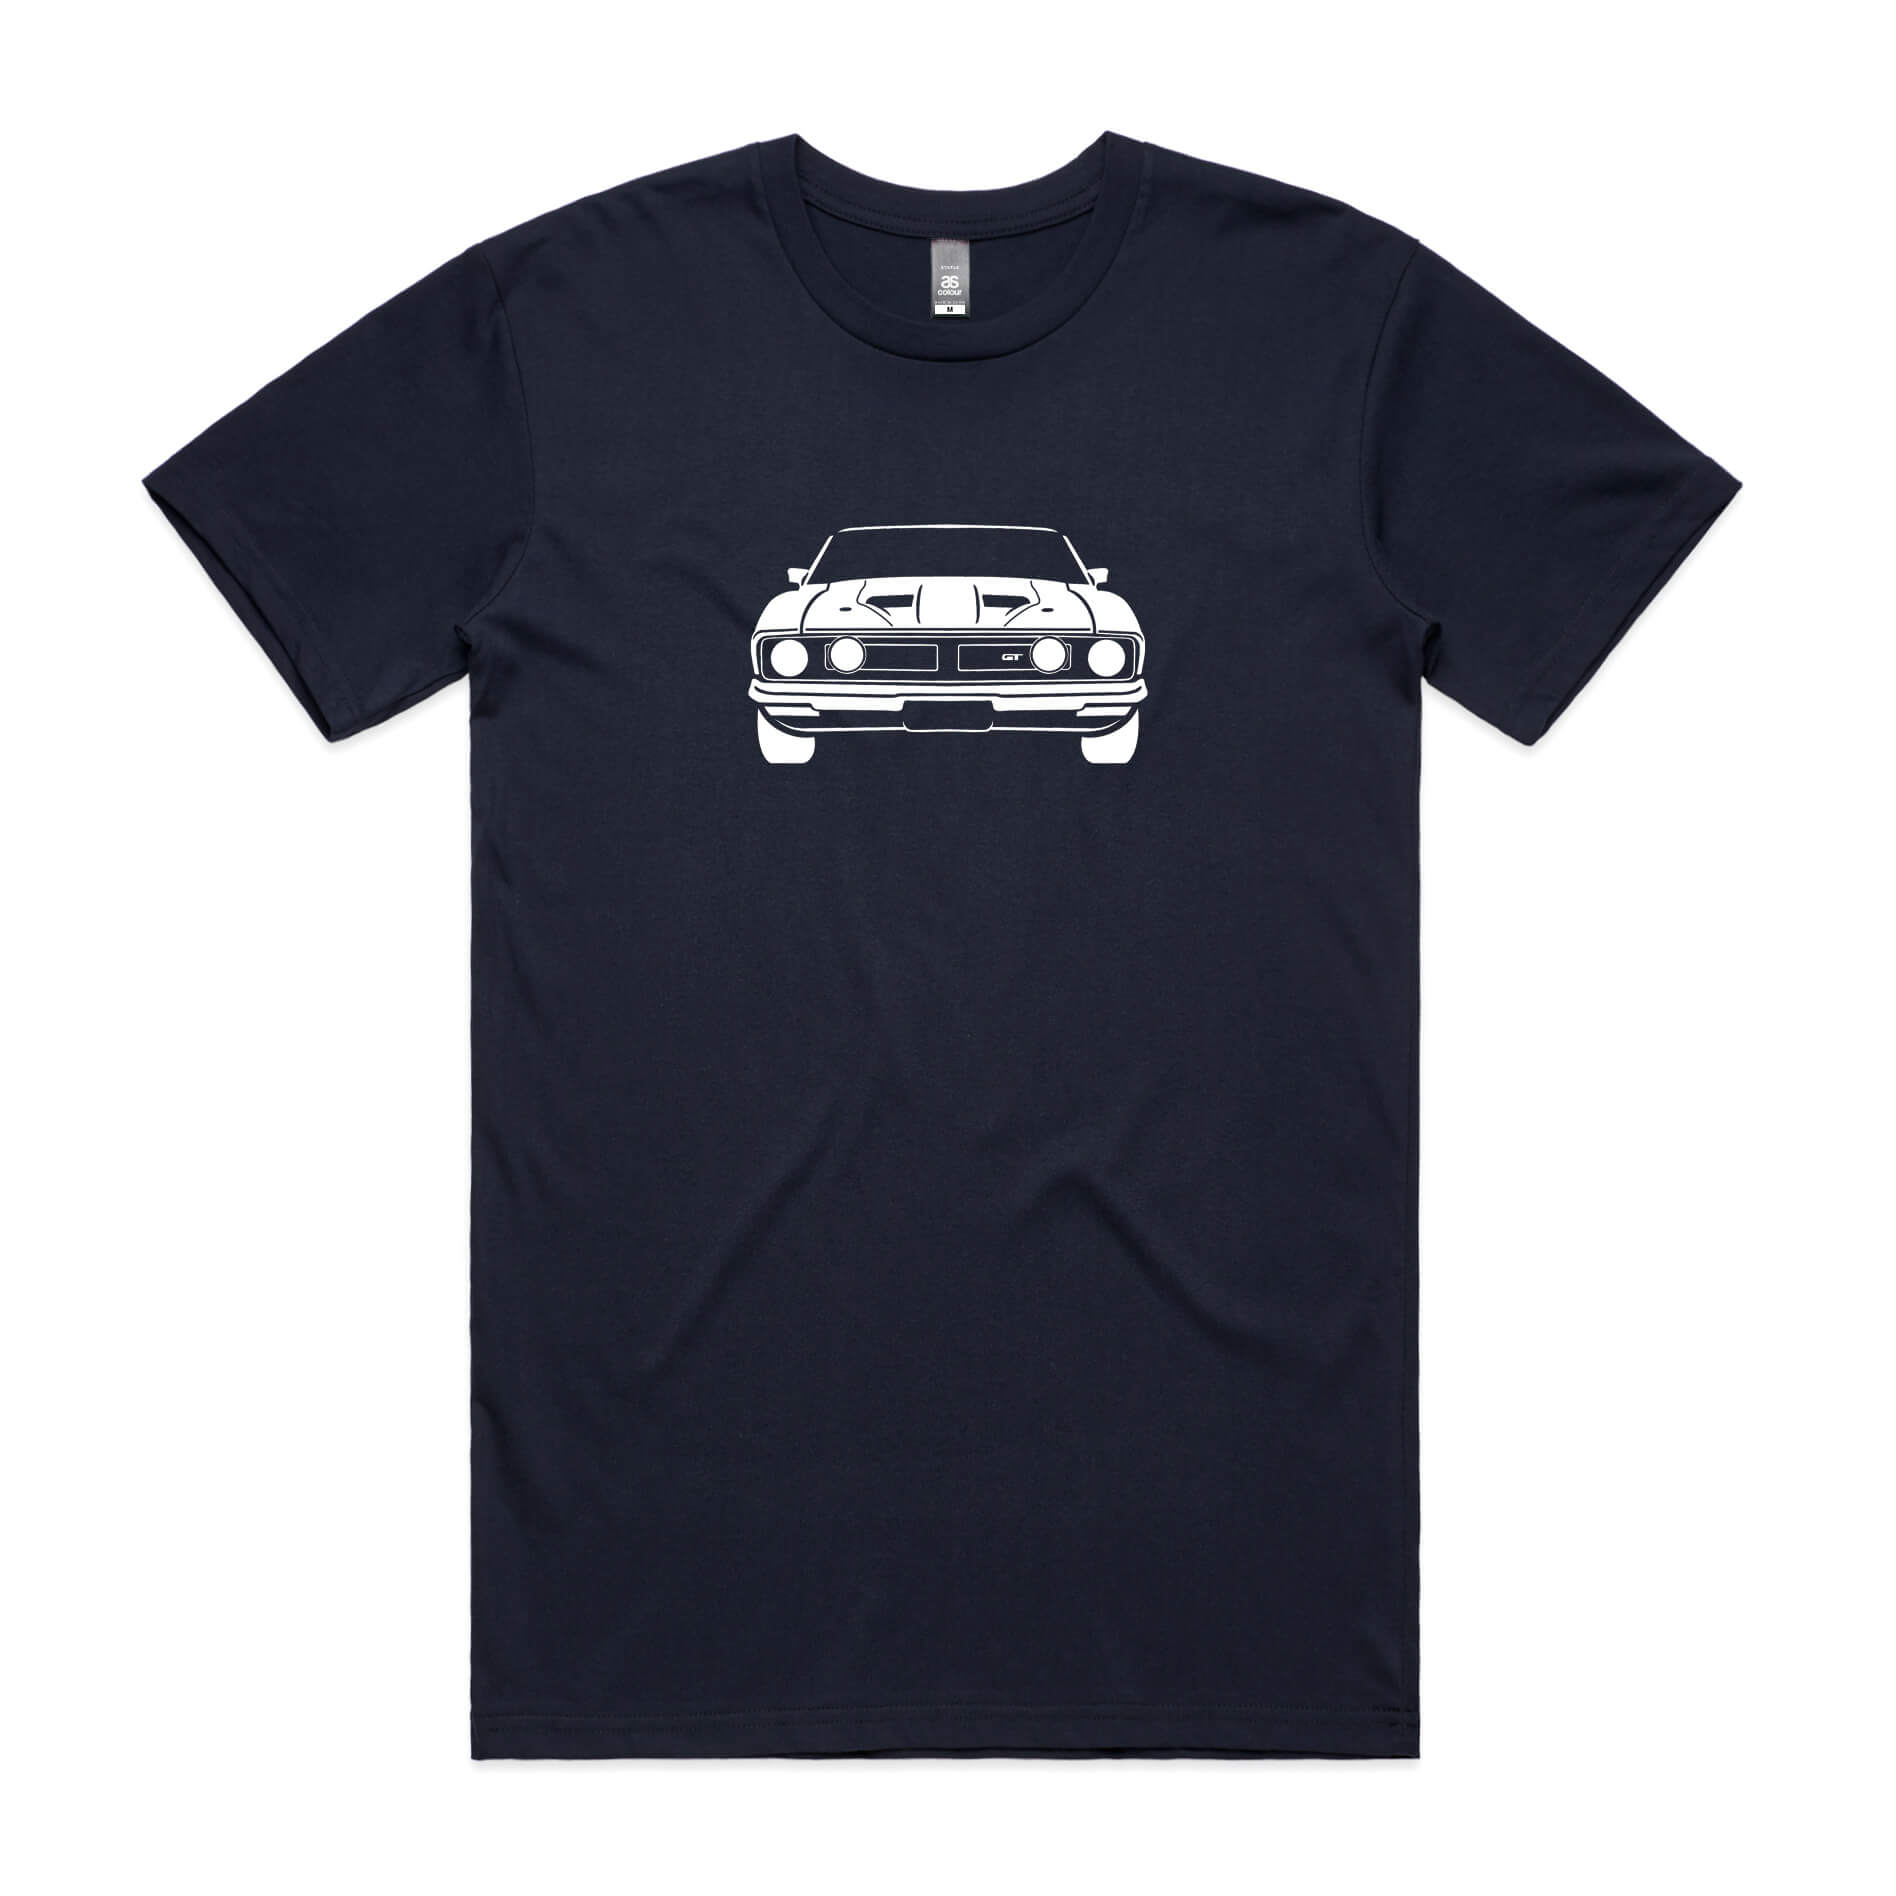 Ford XB Falcon t-shirt in navy blue with a black coupe graphic